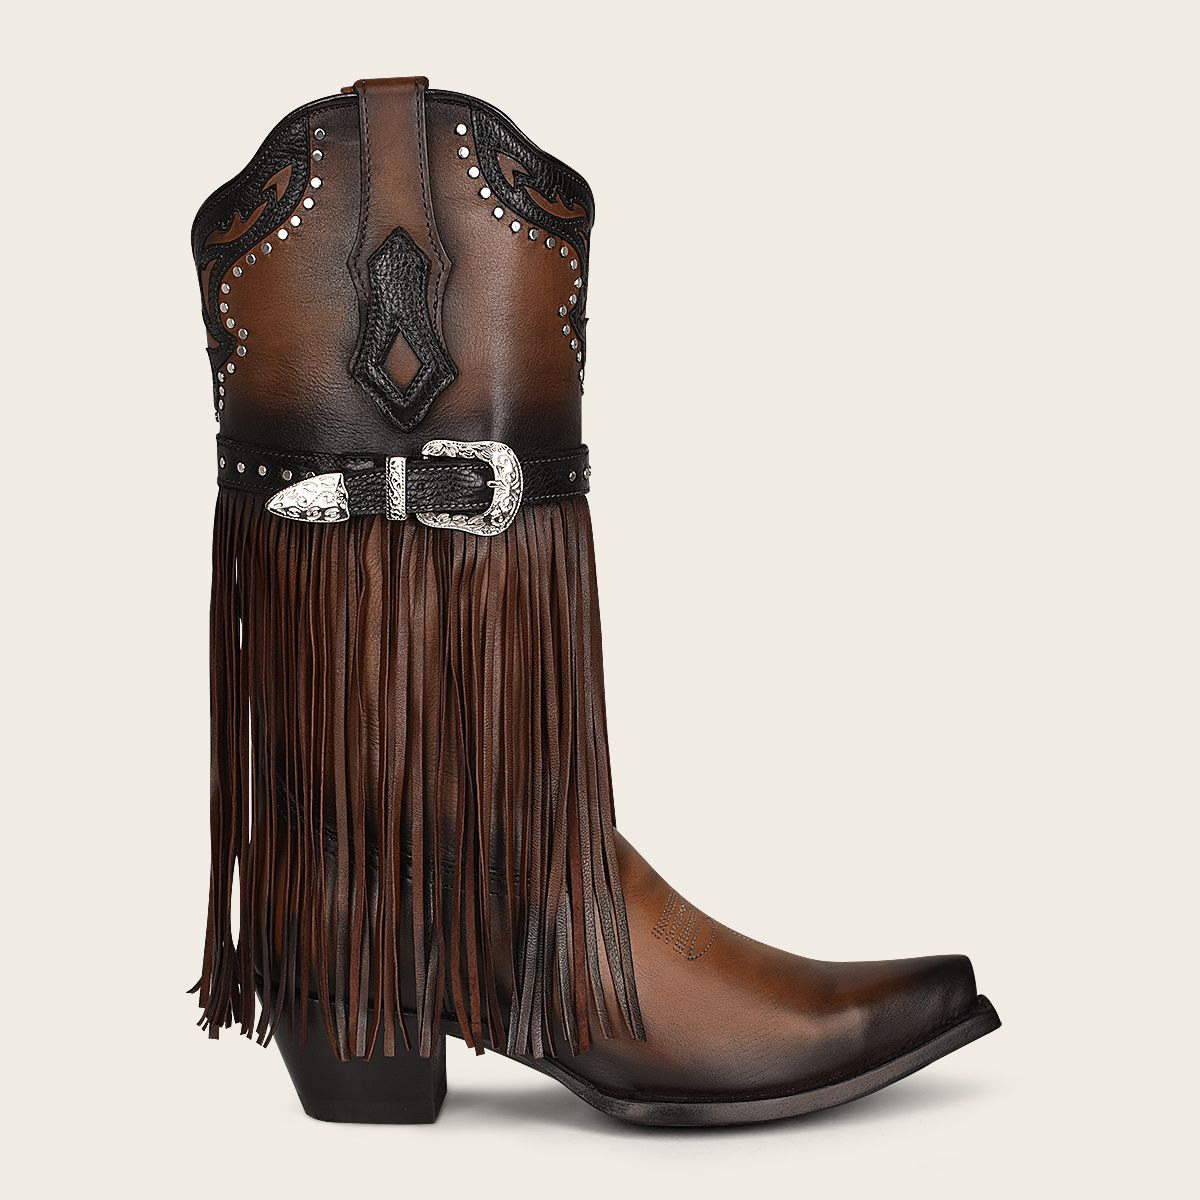 Brown fringed cowboy boot